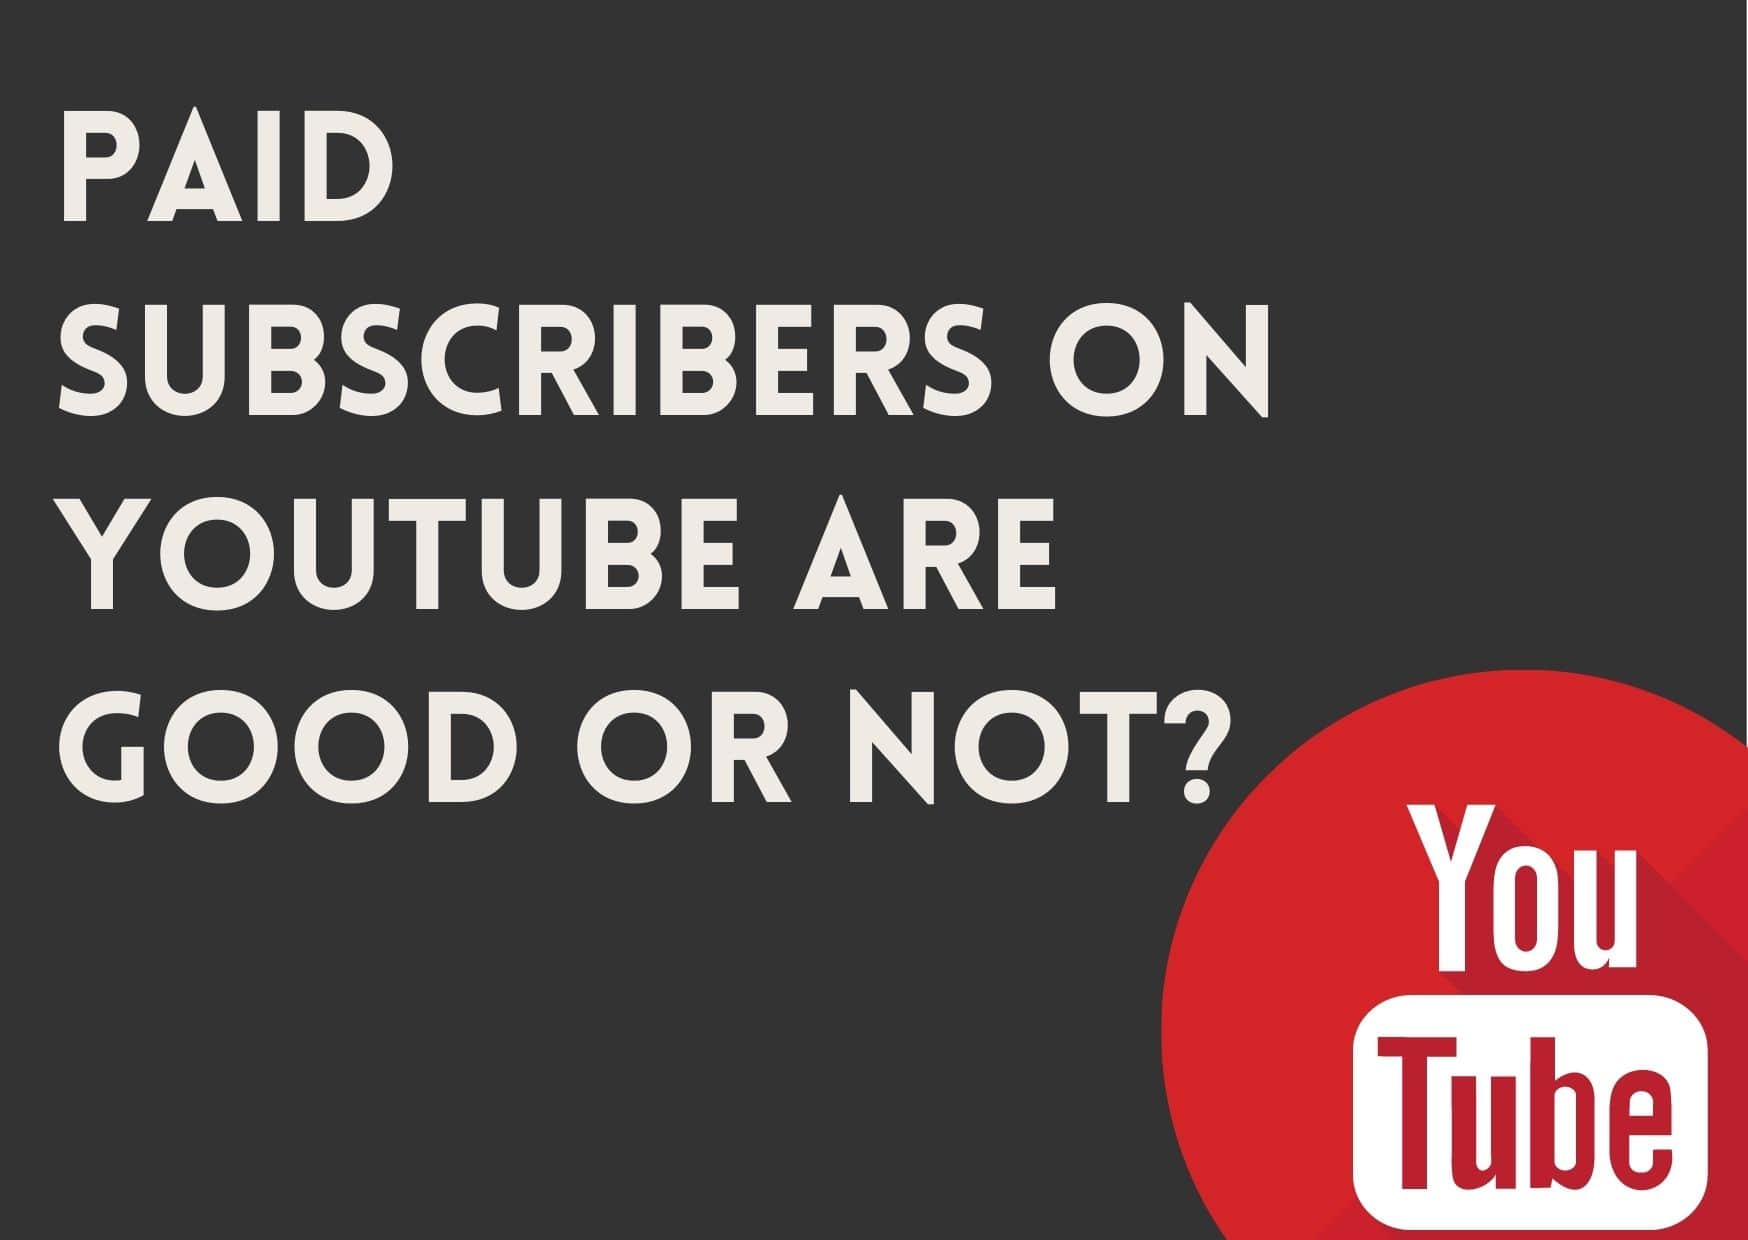 Paid subscribers on youtube are good or not in 2021